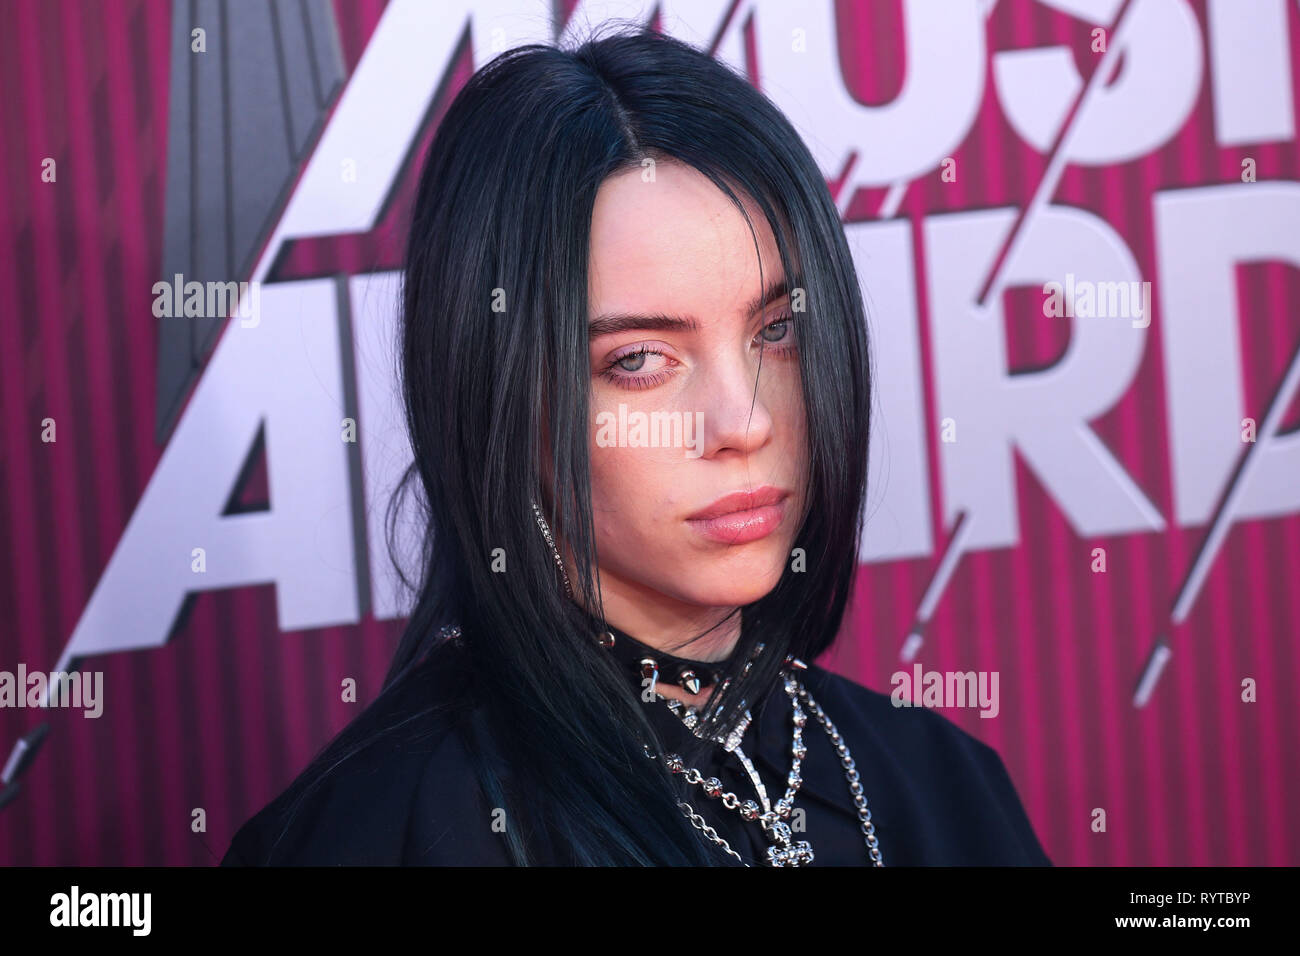 LOS ANGELES, CA, USA - MARCH 14: Singer Billie Eilish arrives at the 2019 iHeartRadio Music Awards held at Microsoft Theater at L.A. Live on March 14, 2019 in Los Angeles, California, United States. (Photo by Xavier Collin/Image Press Agency) Stock Photo